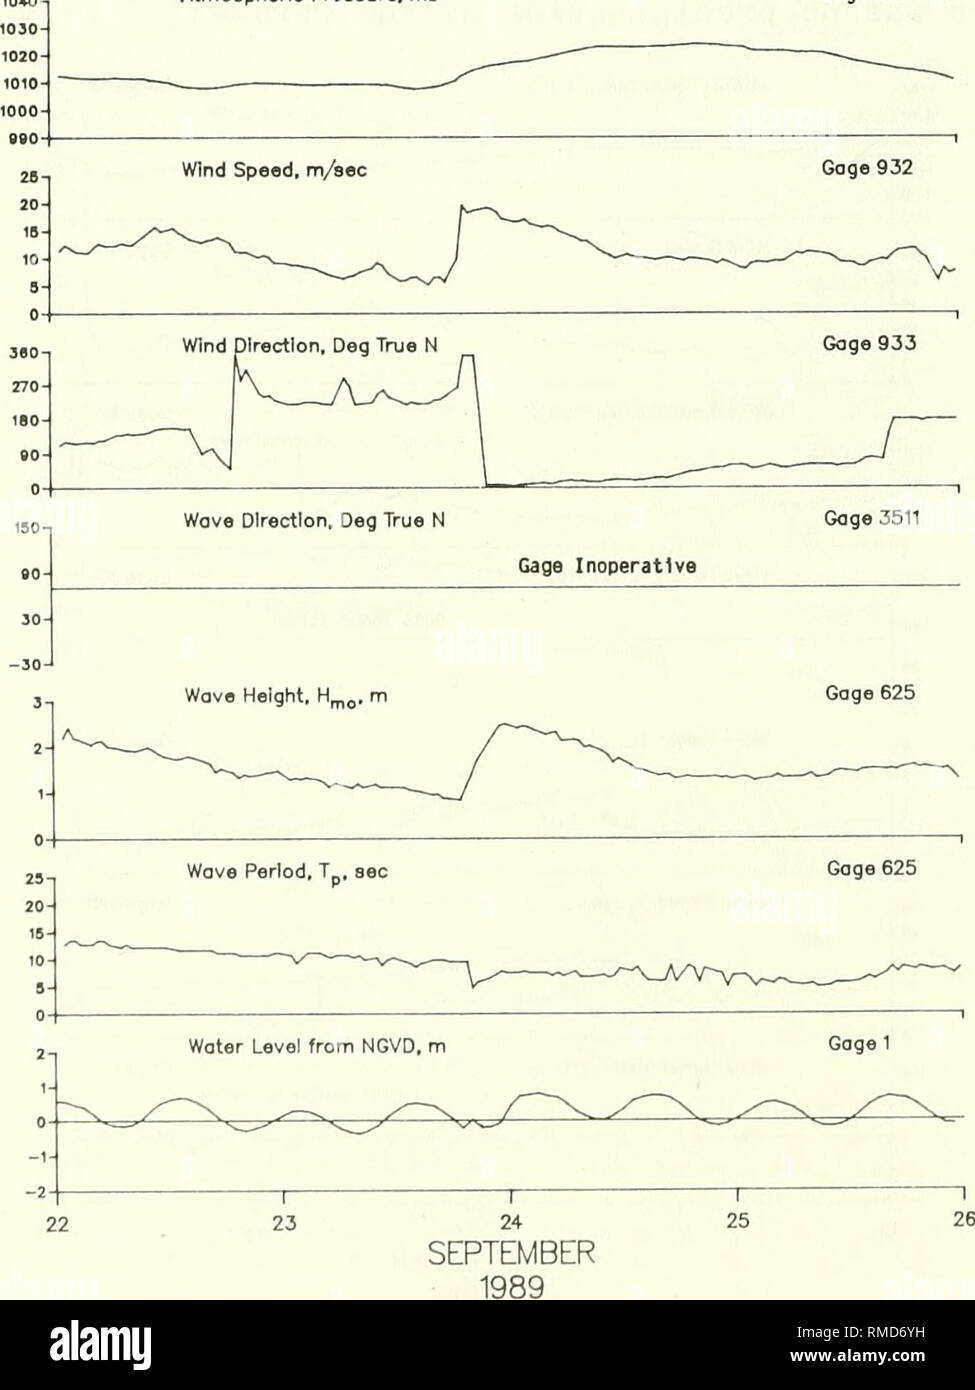 . Annual data summary for 1989, CERC Field Research Facility : volume 1, main text and appendixes A and B. Ocean waves; Oceanographic research stations; Marine meteorology; Storms. 23-24 September 1989 (Figure 36) 75. Following the passage of a cold front, strong winds generated by a large high pressure system located over Michigan began to affect the FRF late on 23 September. Maximum wind speeds (from the north-northeast) exceeding 18 m/sec occurred on 23 September at 2200 EST. The maximum H^ (Gage 625) of 2.50 m (Tp =7.53 sec) was recorded 2 hr later at 2342 EST. Total precipitation was 6 mm Stock Photo